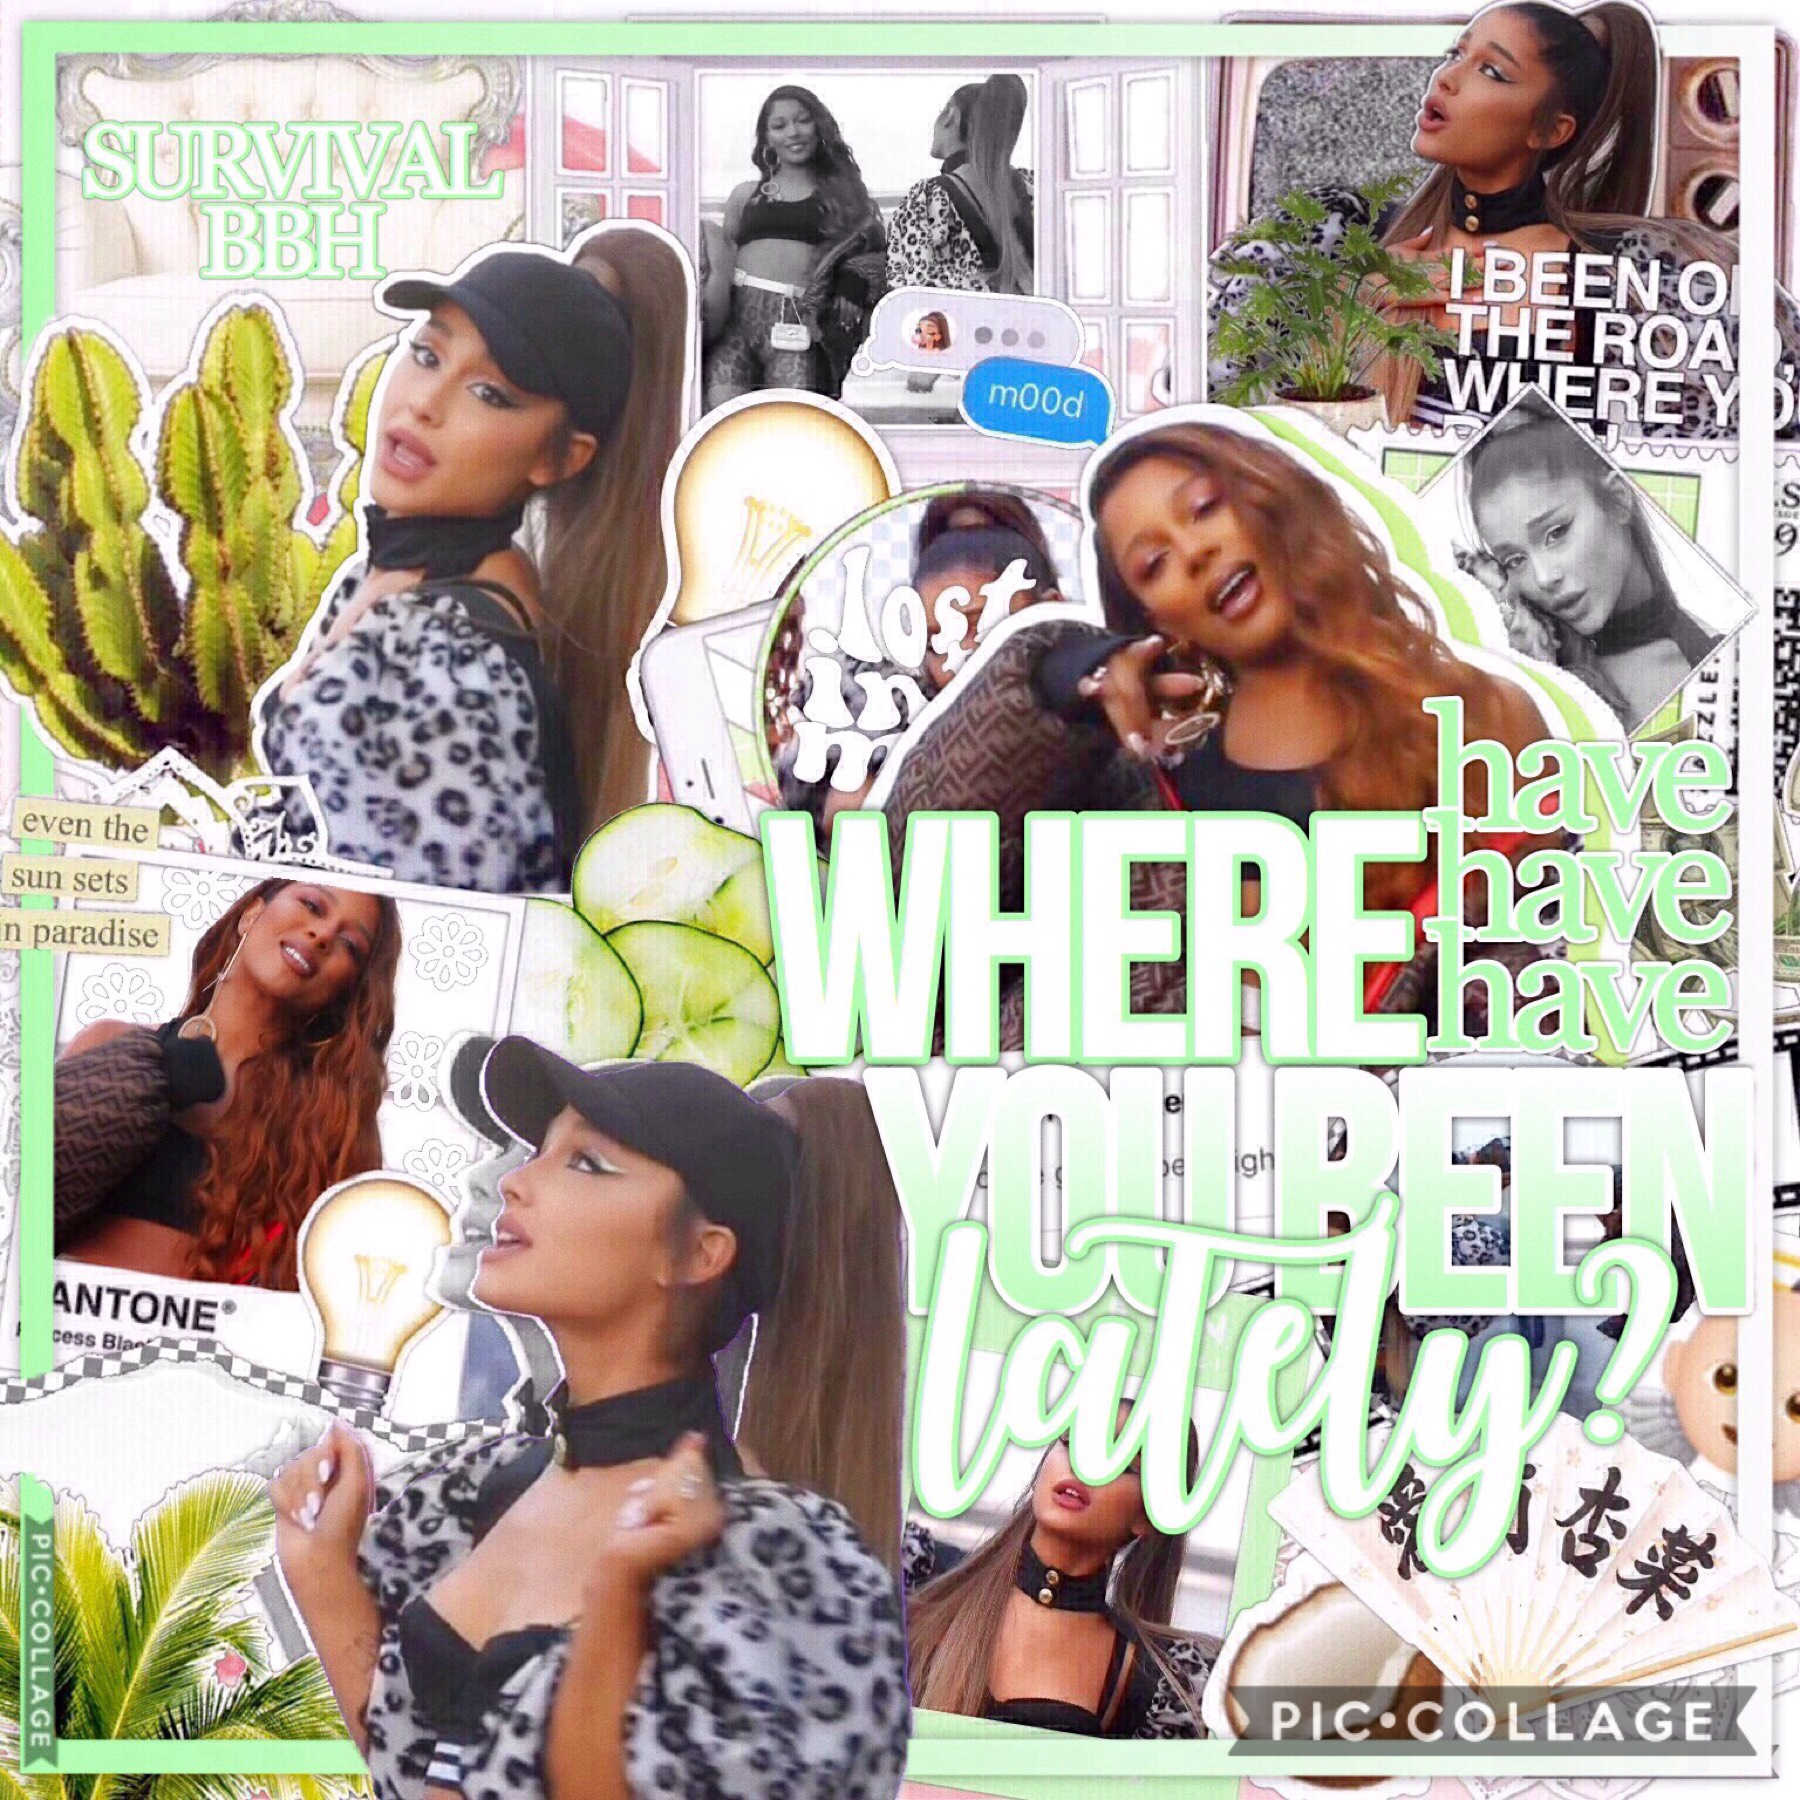 hi friends, i'm back (i think) and this is my first edit after a while💚 i've been inactive since fall 2018 so it's been a looong time! what's up?🍹